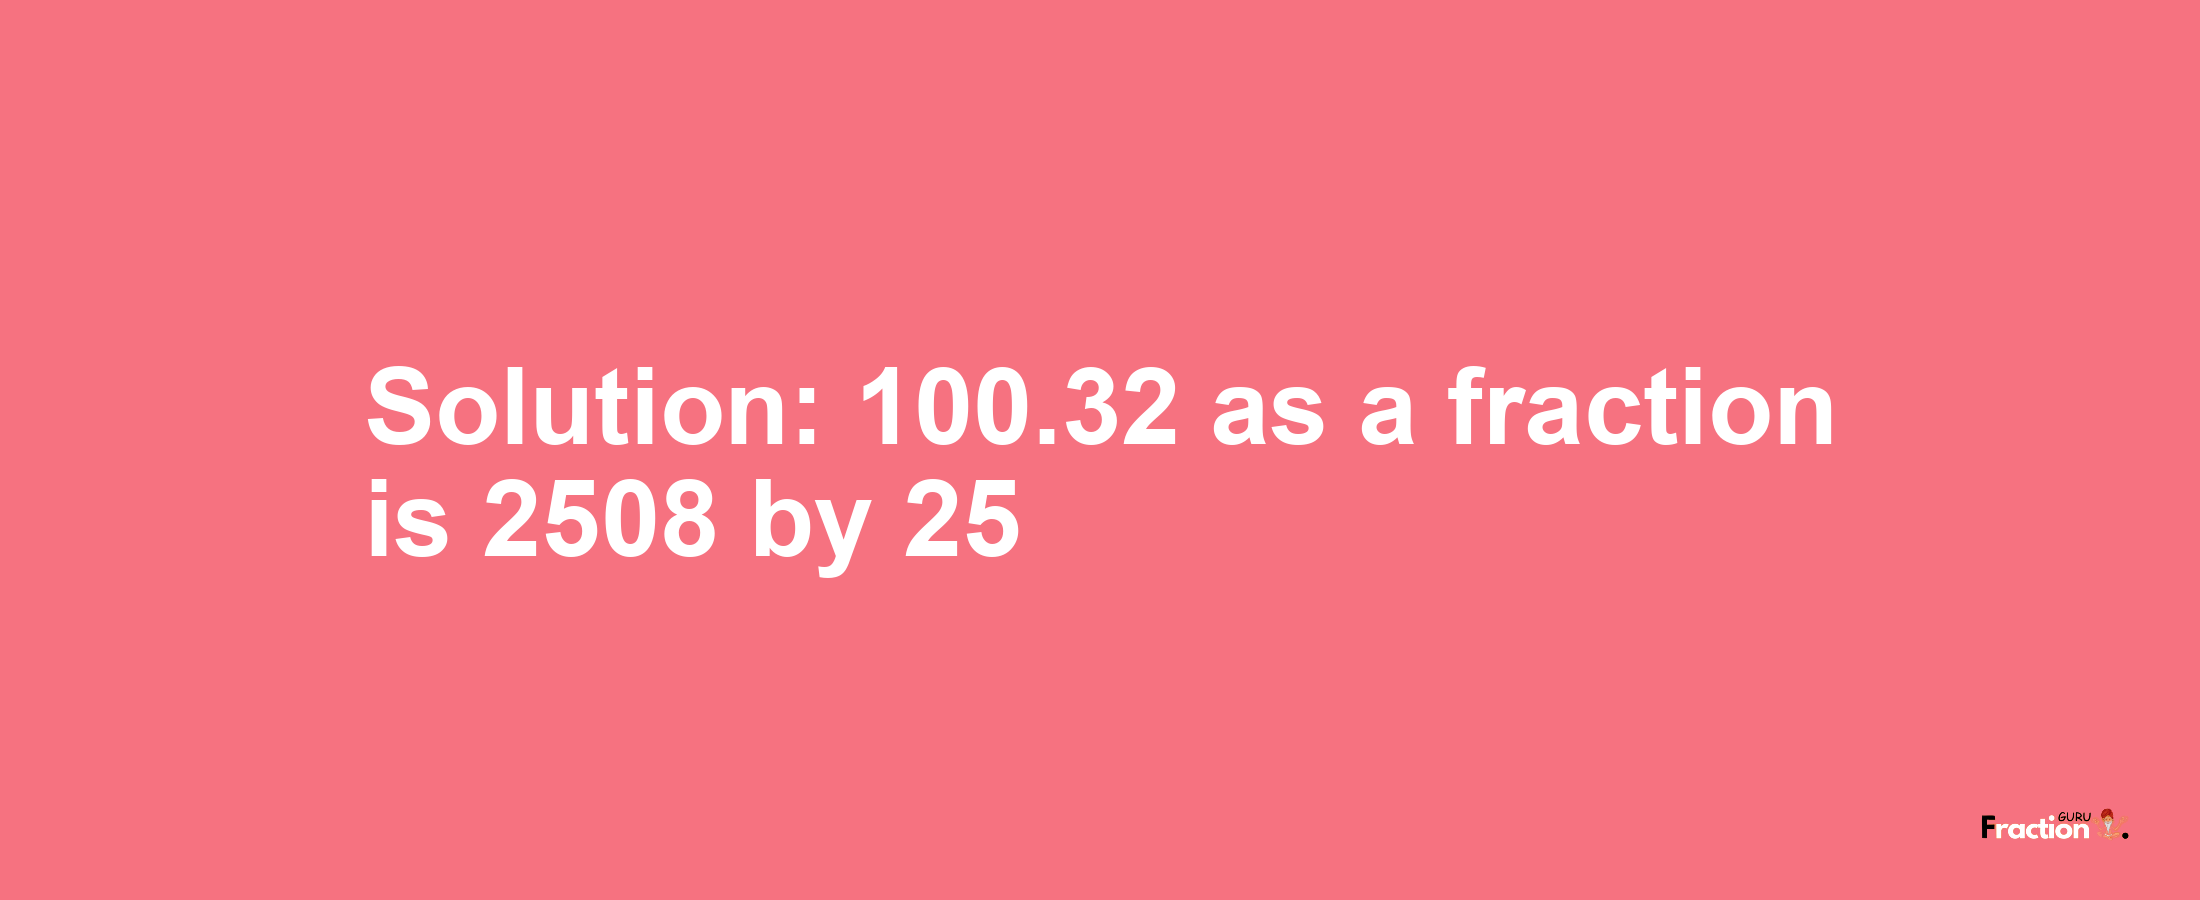 Solution:100.32 as a fraction is 2508/25